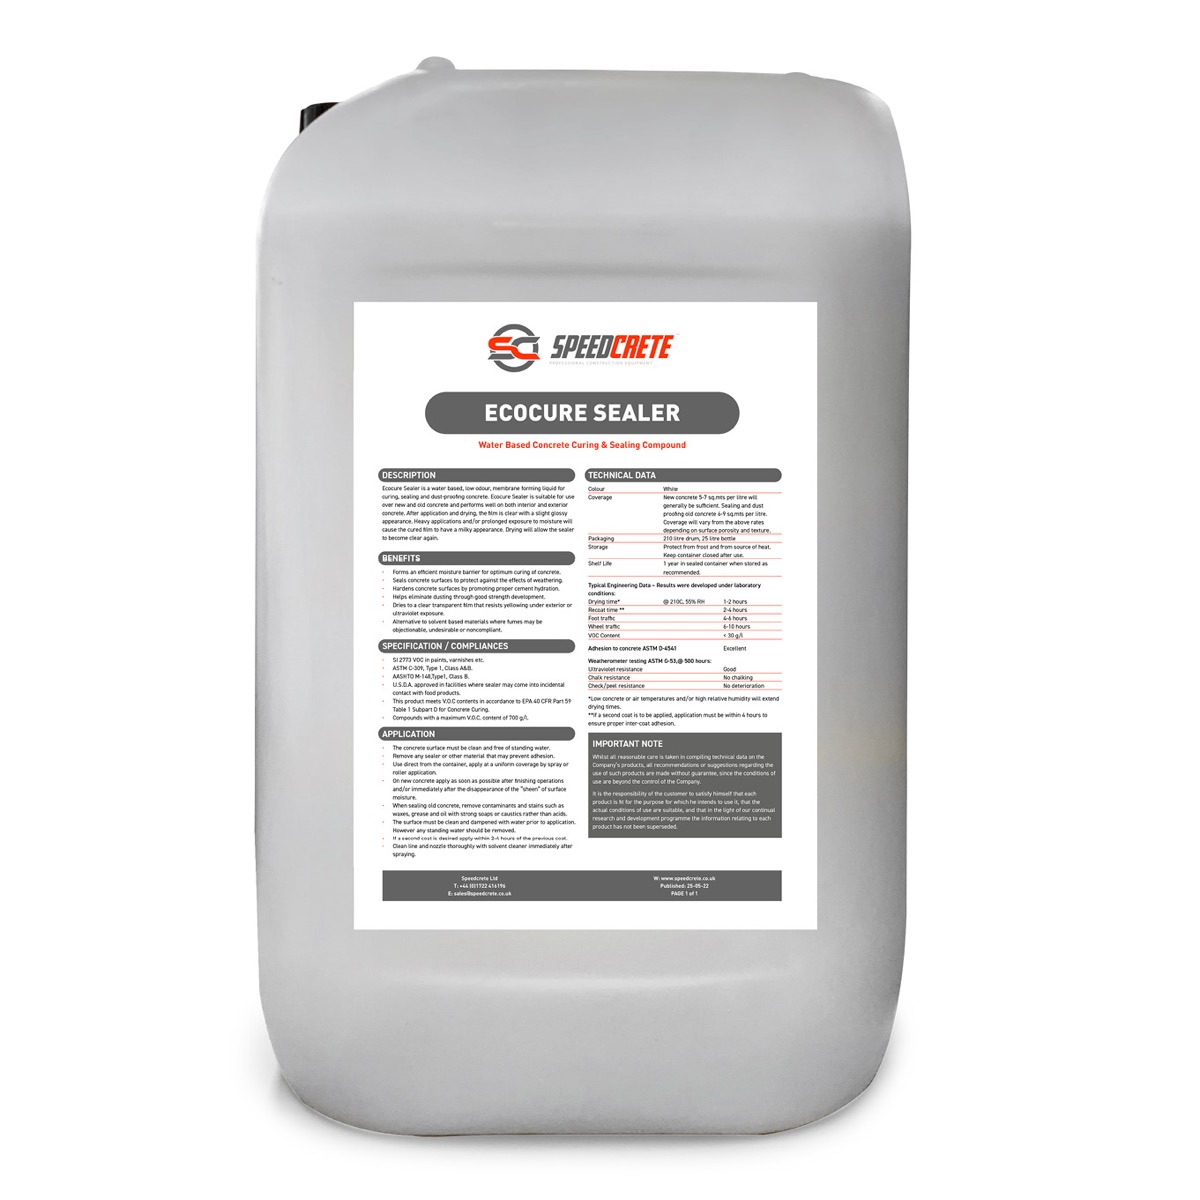 Ecocure Sealer 25 Litres is a water based curing agent which is sprayed on to the concrete to ensure hardness, resistant to dust. Available from Speedcrete, United Kingdom.